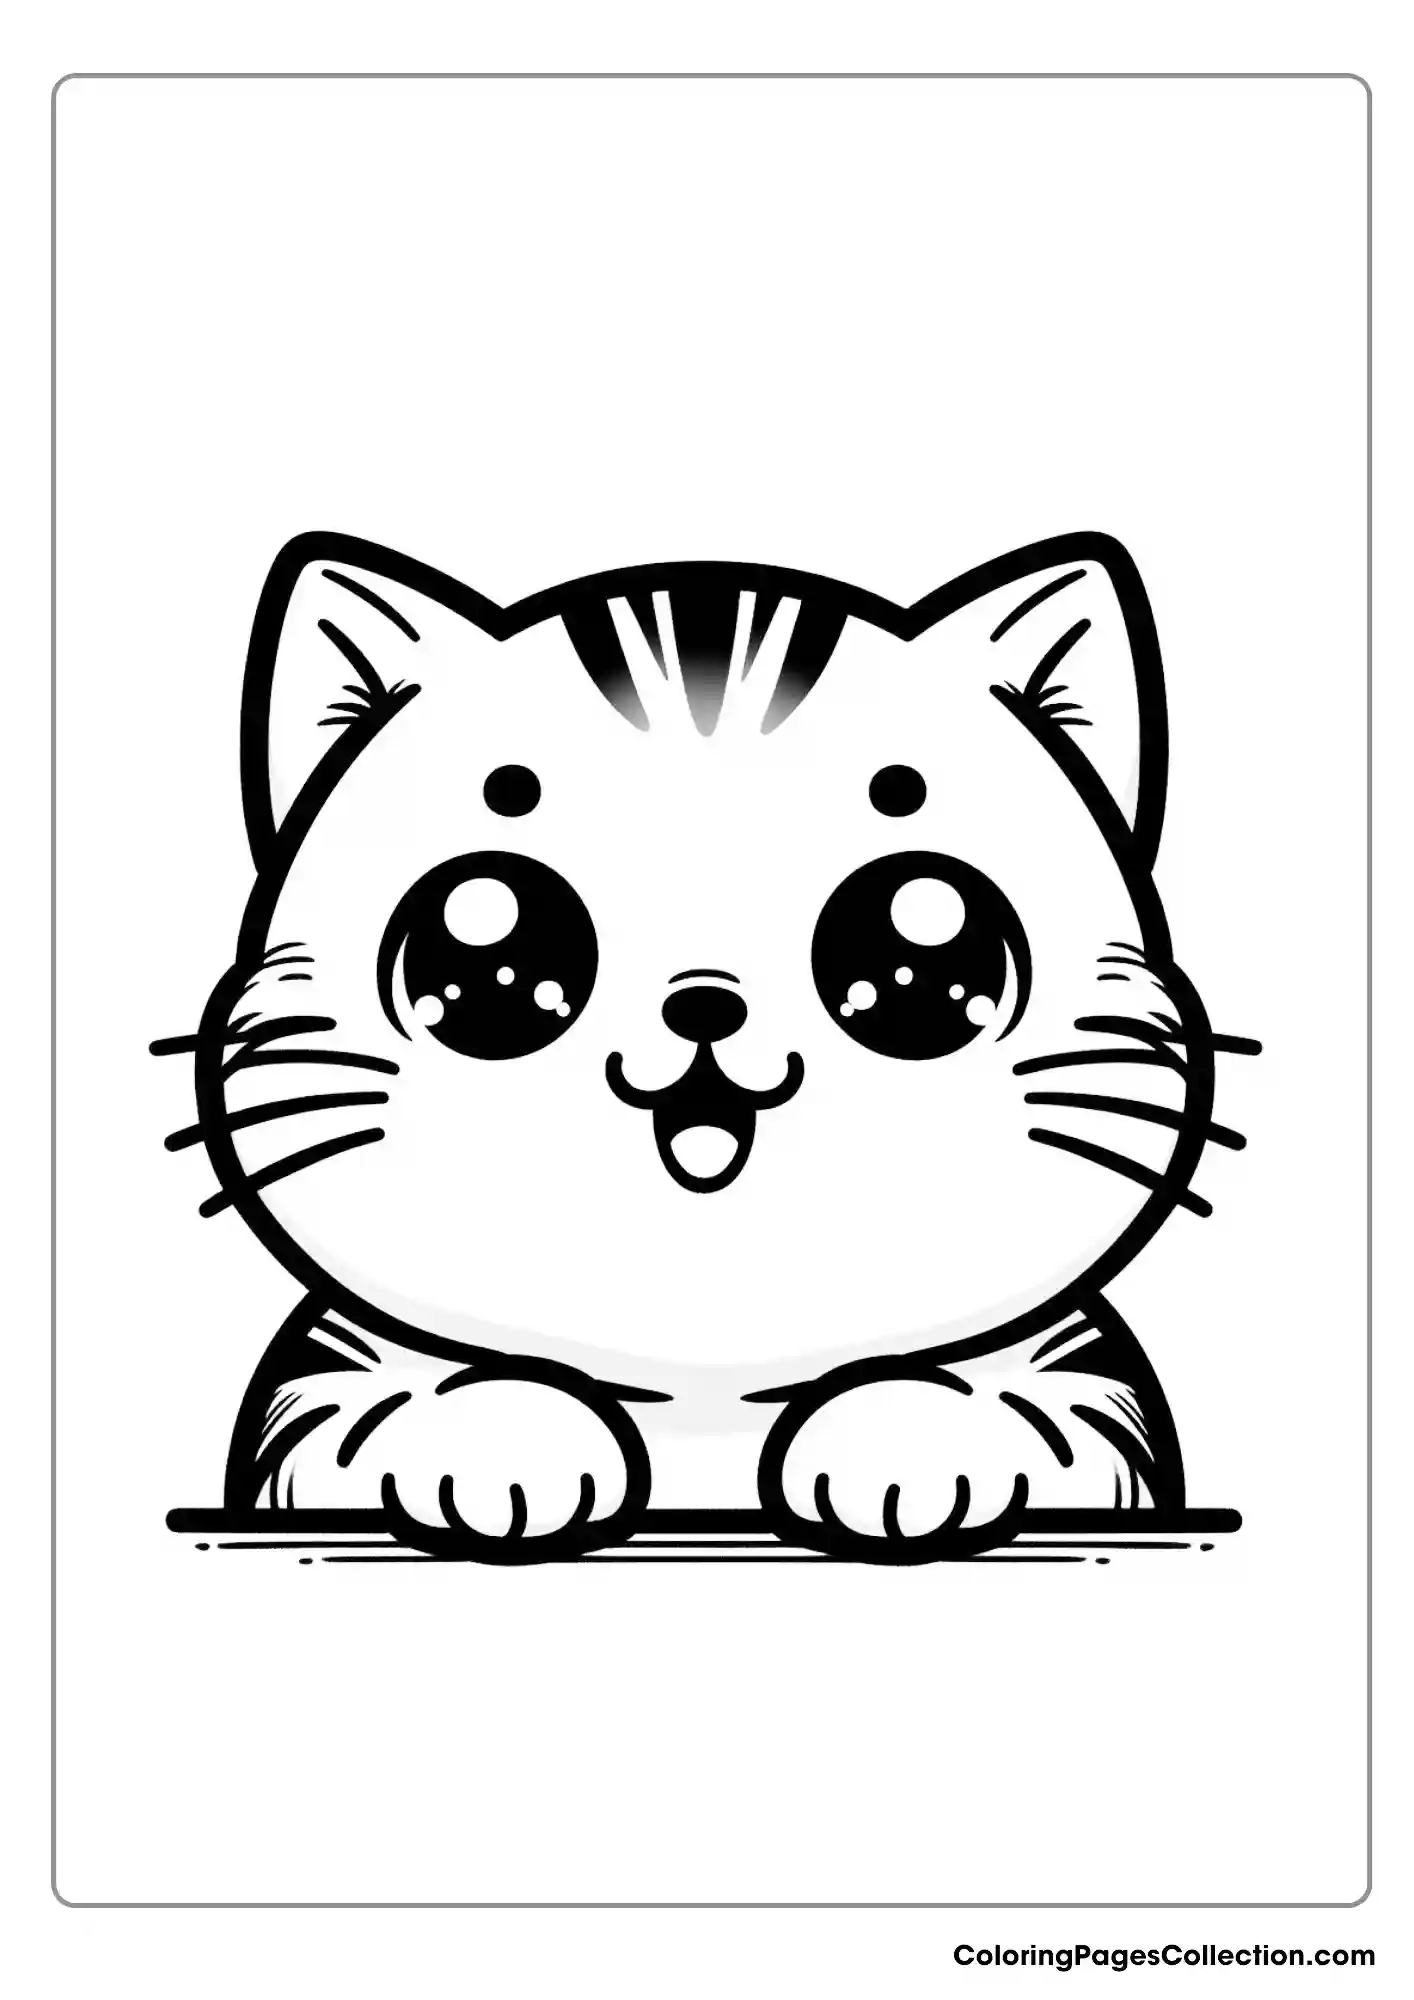 Cute Kitten Coloring Pages - Printable & Free